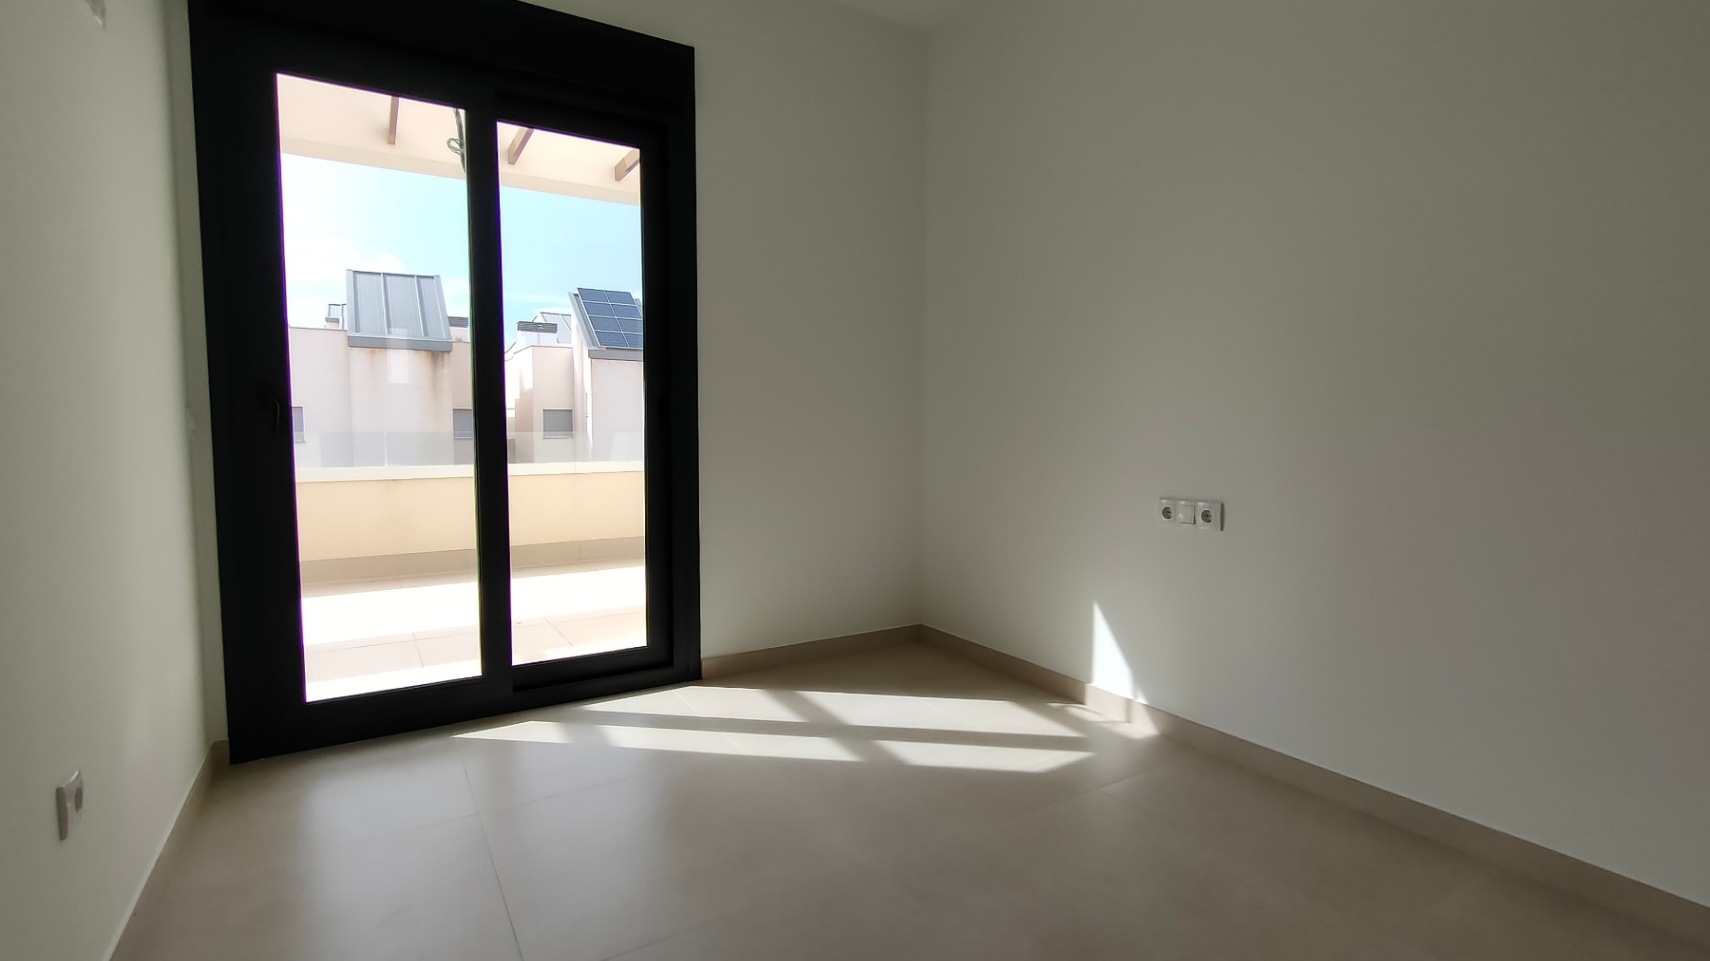 New development, 2 and 3 bedroom homes by the sea on the Costa Blanca, Torrevieja.